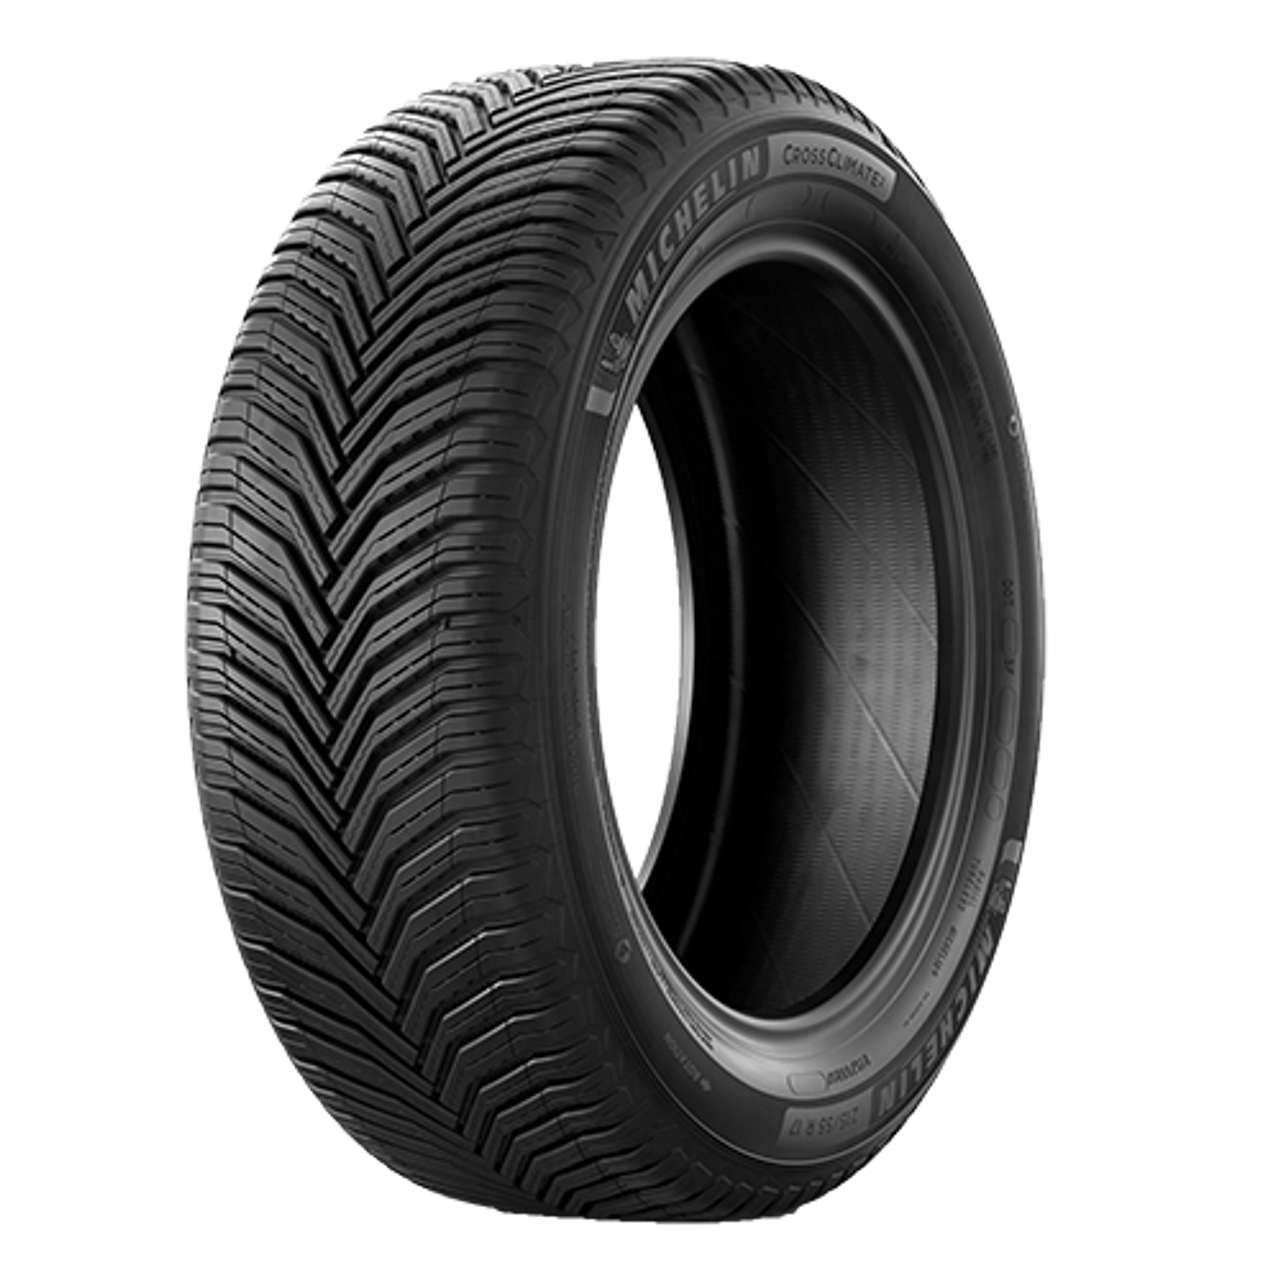 MICHELIN CROSSCLIMATE 2 215/45R20 95T BSW